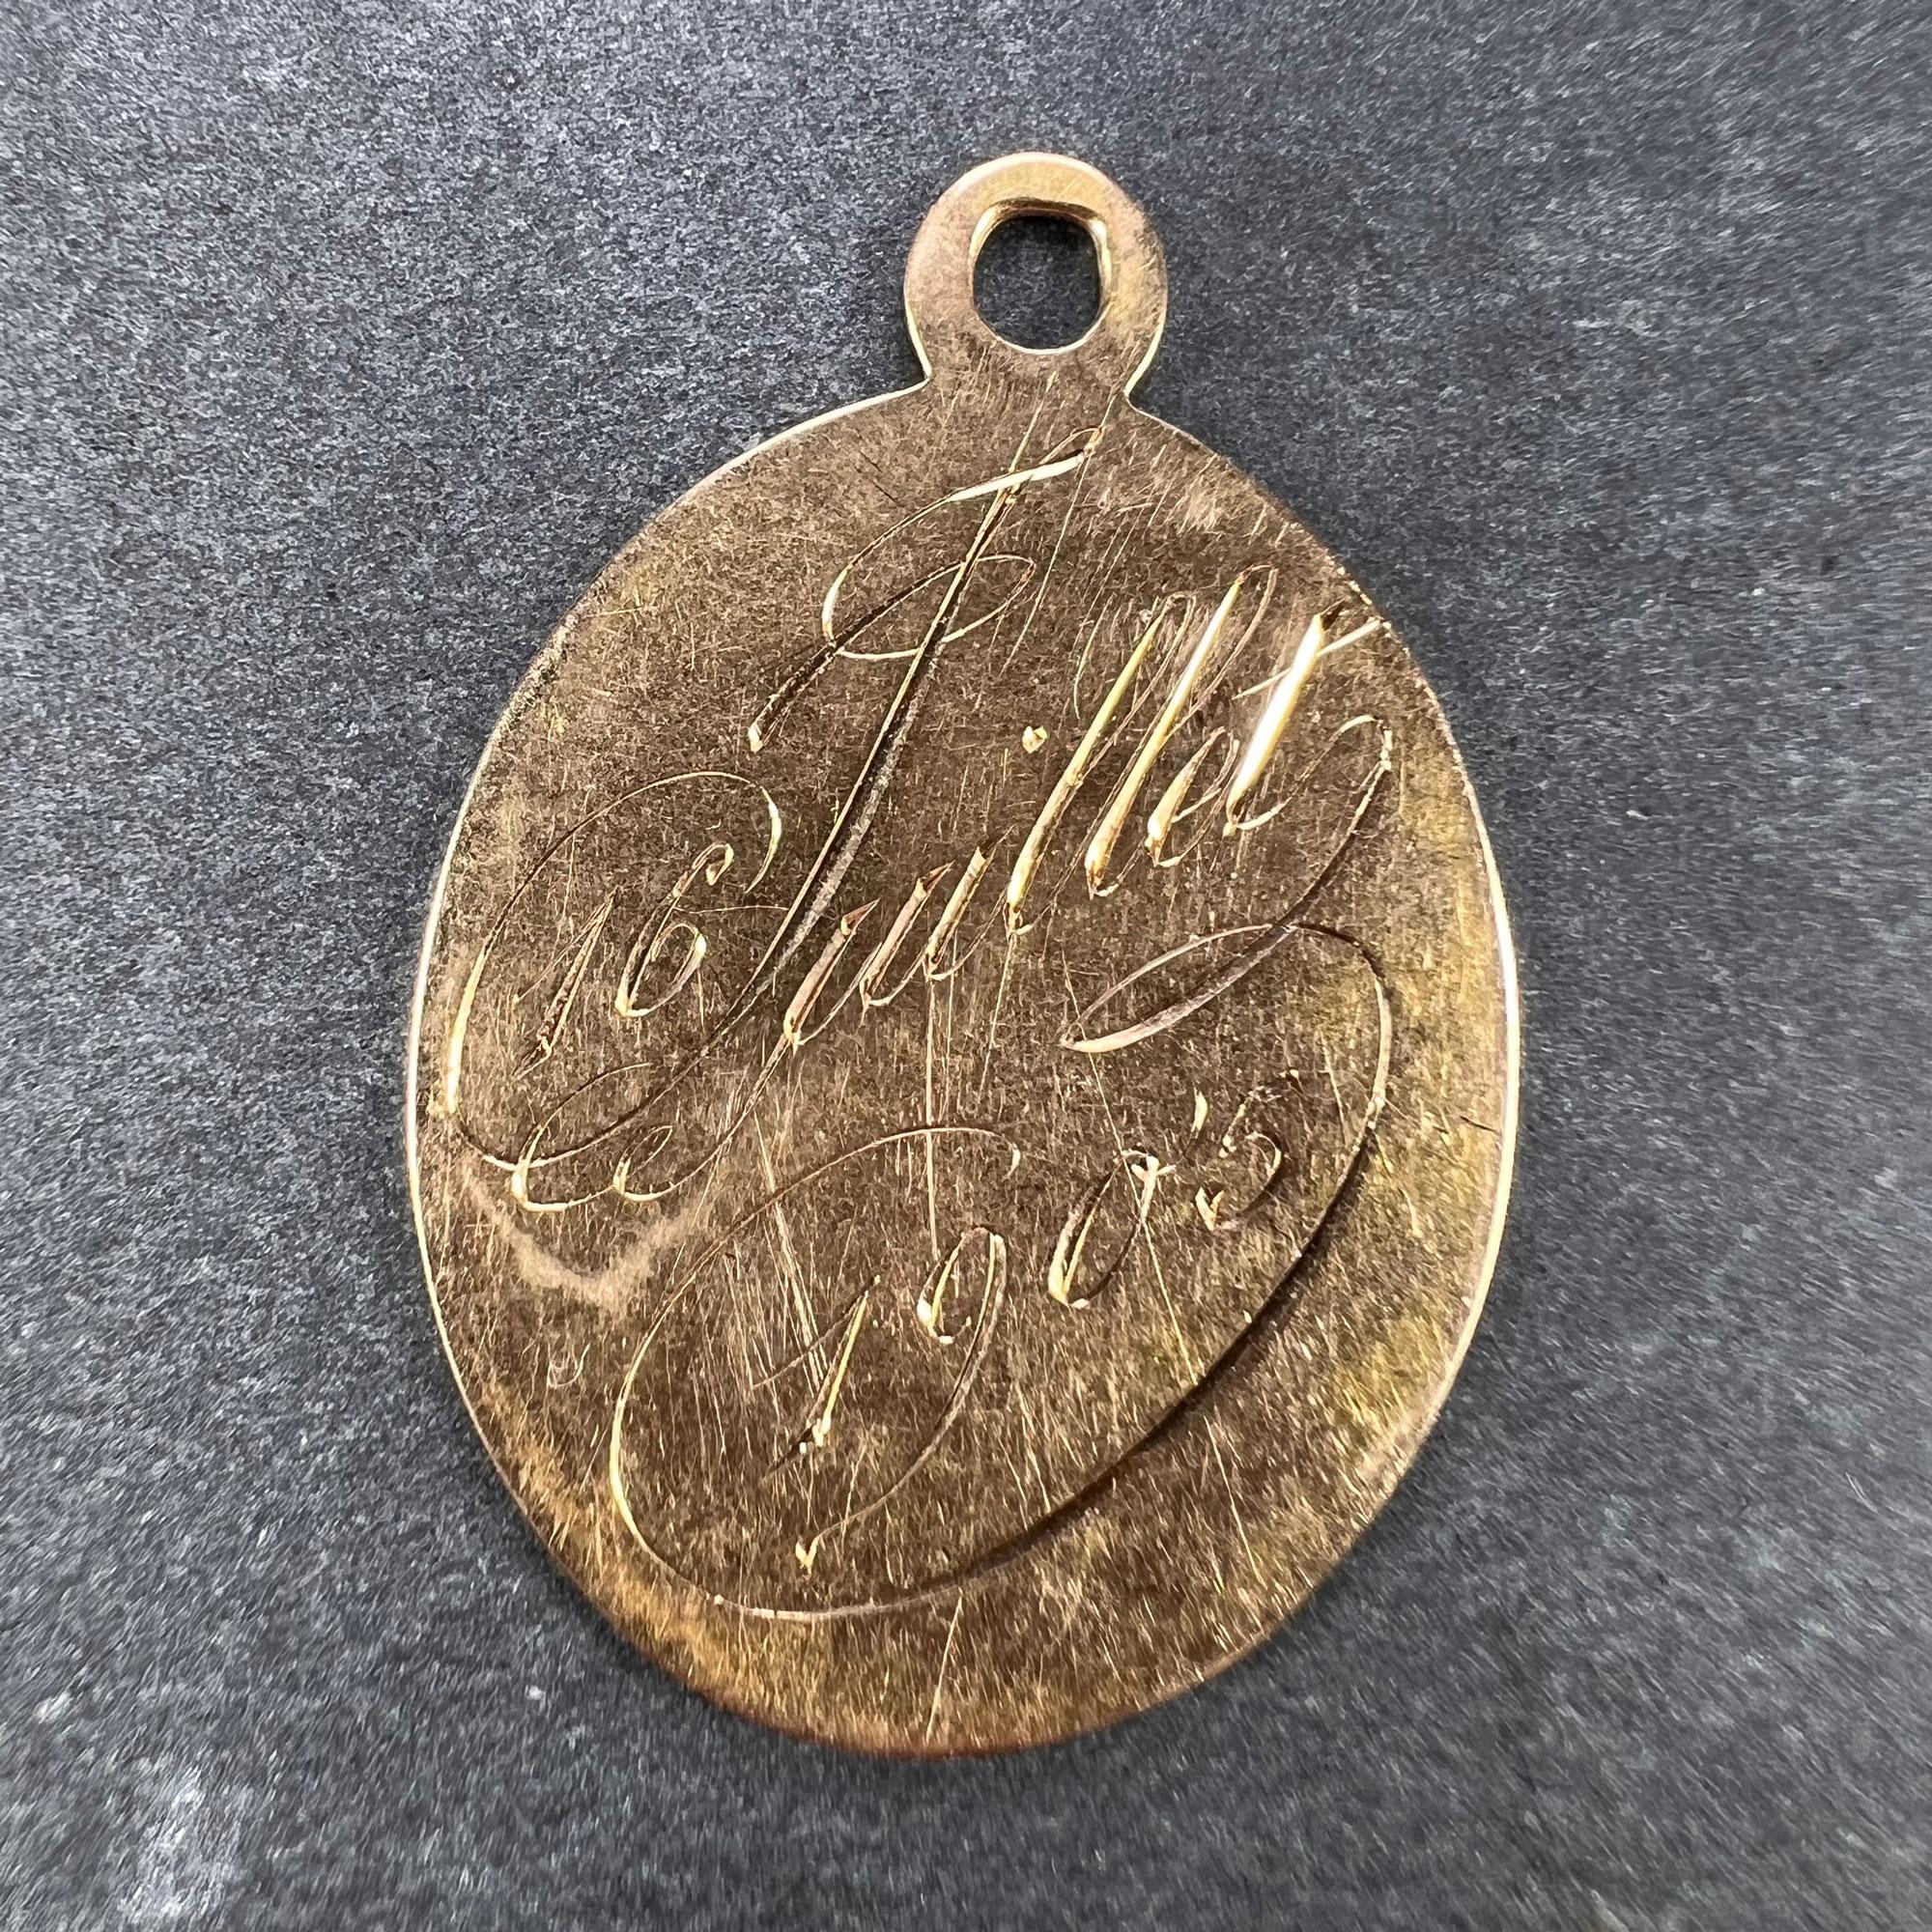 French 18k Yellow Gold GM or MG Monogram Medal Pendant In Good Condition For Sale In London, GB